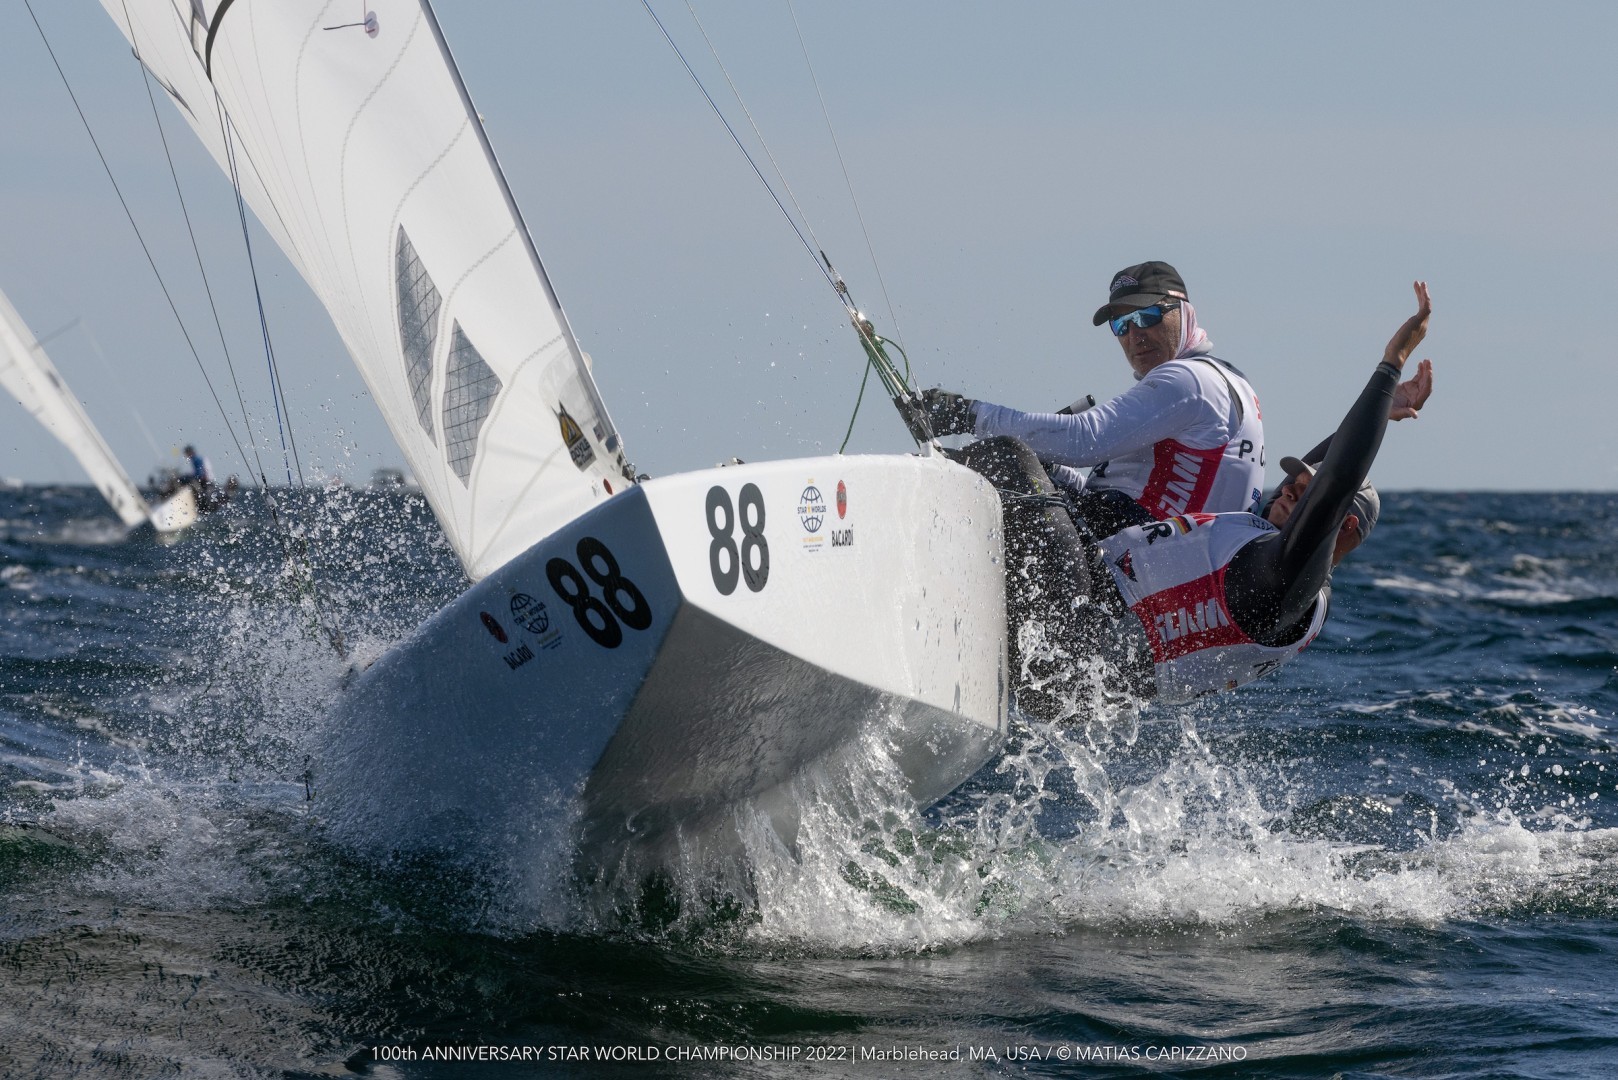 Big breeze shakes up the racetrack at 100th anniversary Star Worlds